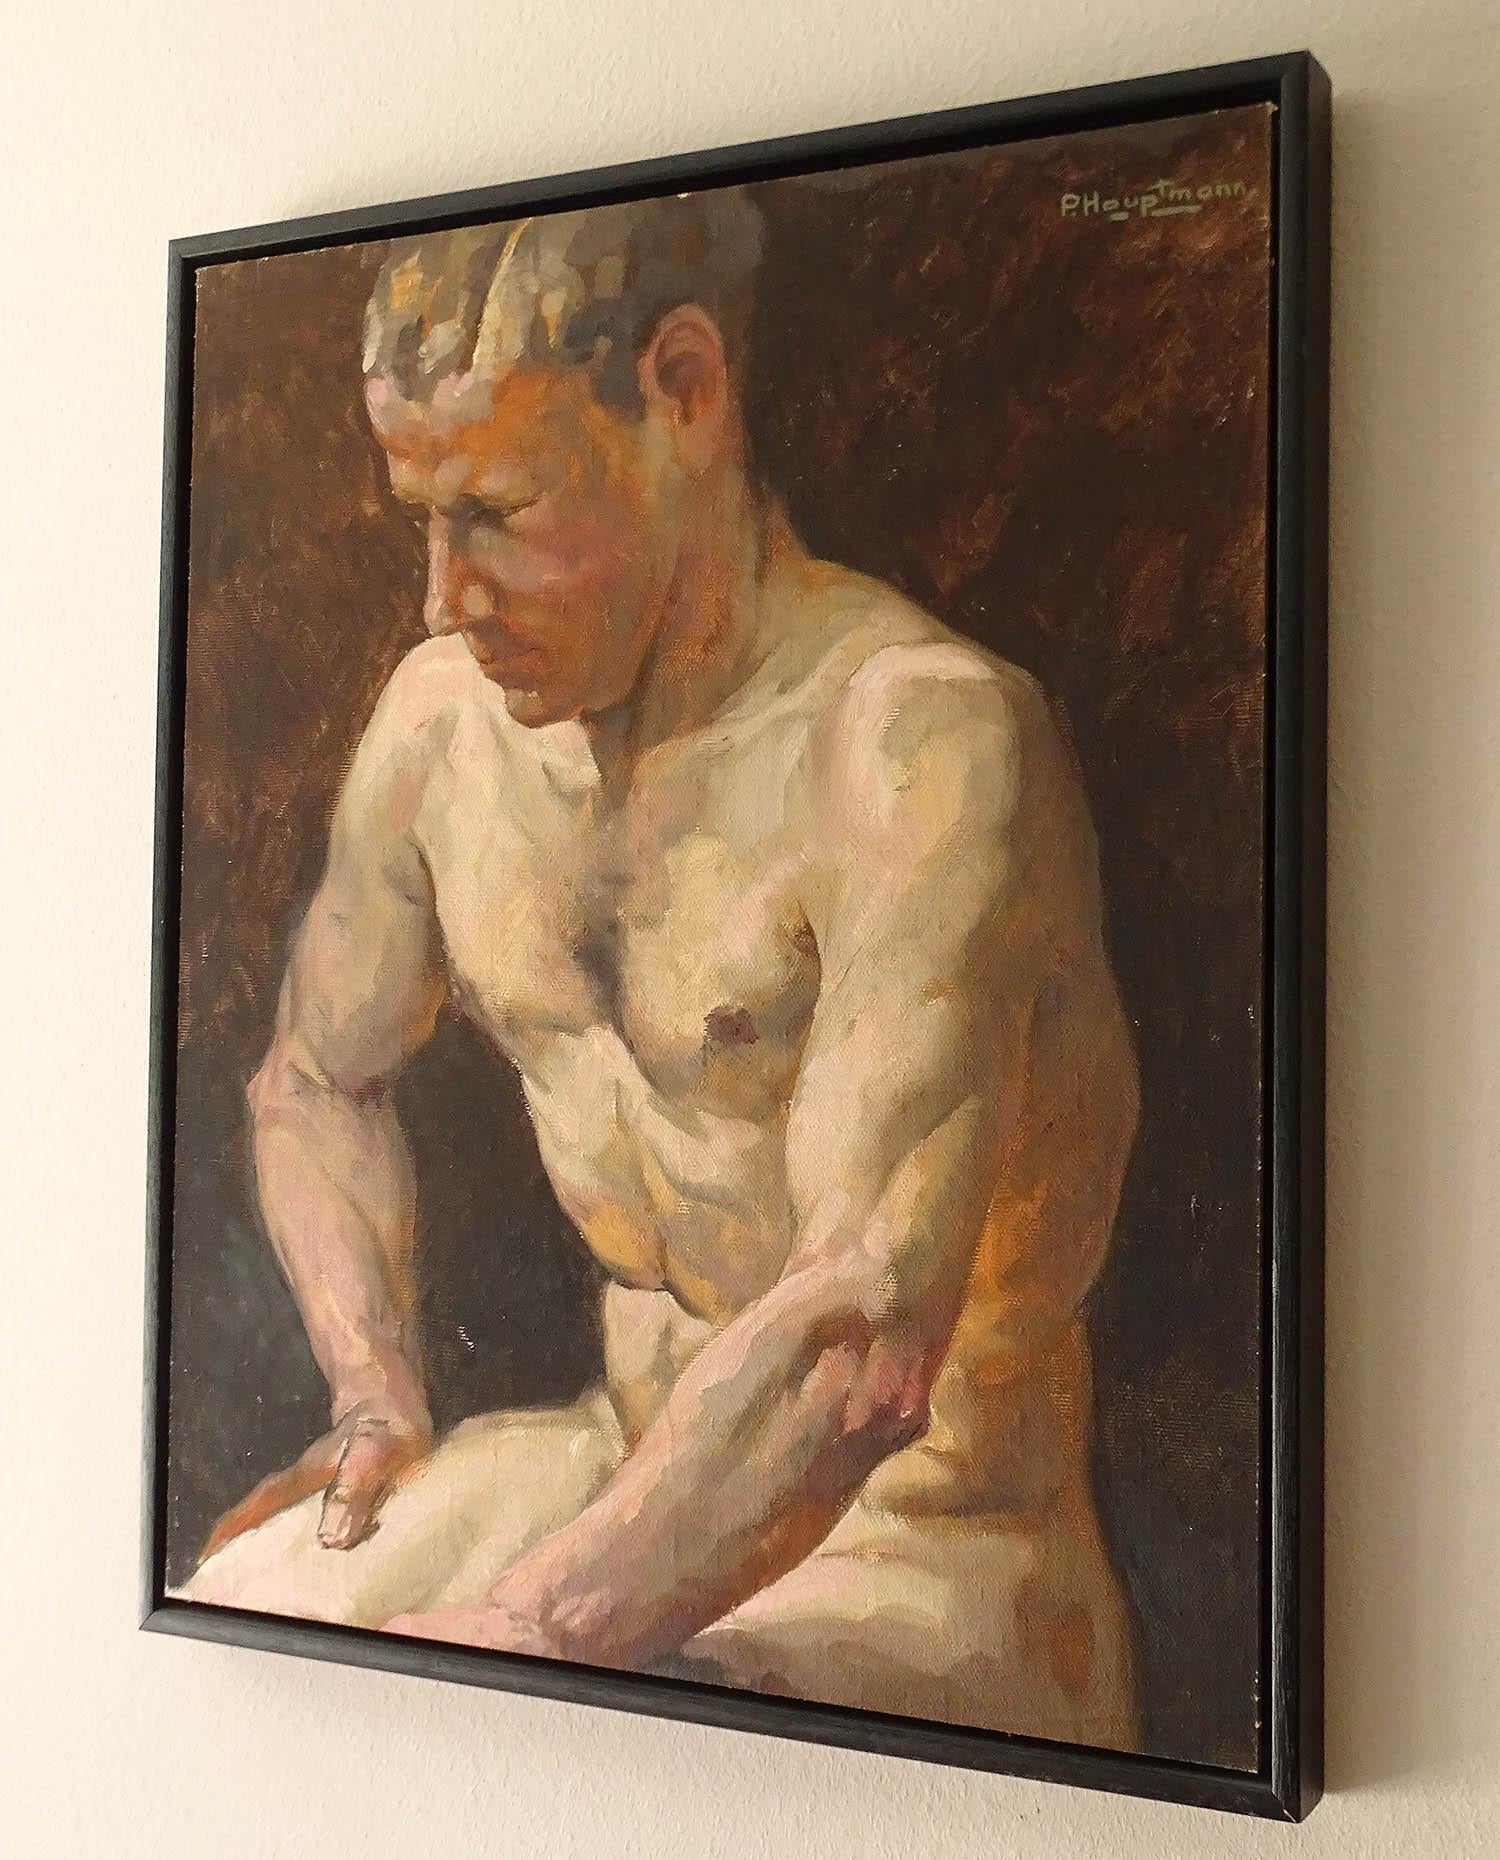 Nude man portrait oil painting by Paul Adolf Hauptmann (1887-1958), circa 1935-1940
Paul Adolf Hauptmann was born the son of an architect and grandson of a blacksmith. At a young age he went to Berlin, where he studied as a master student of